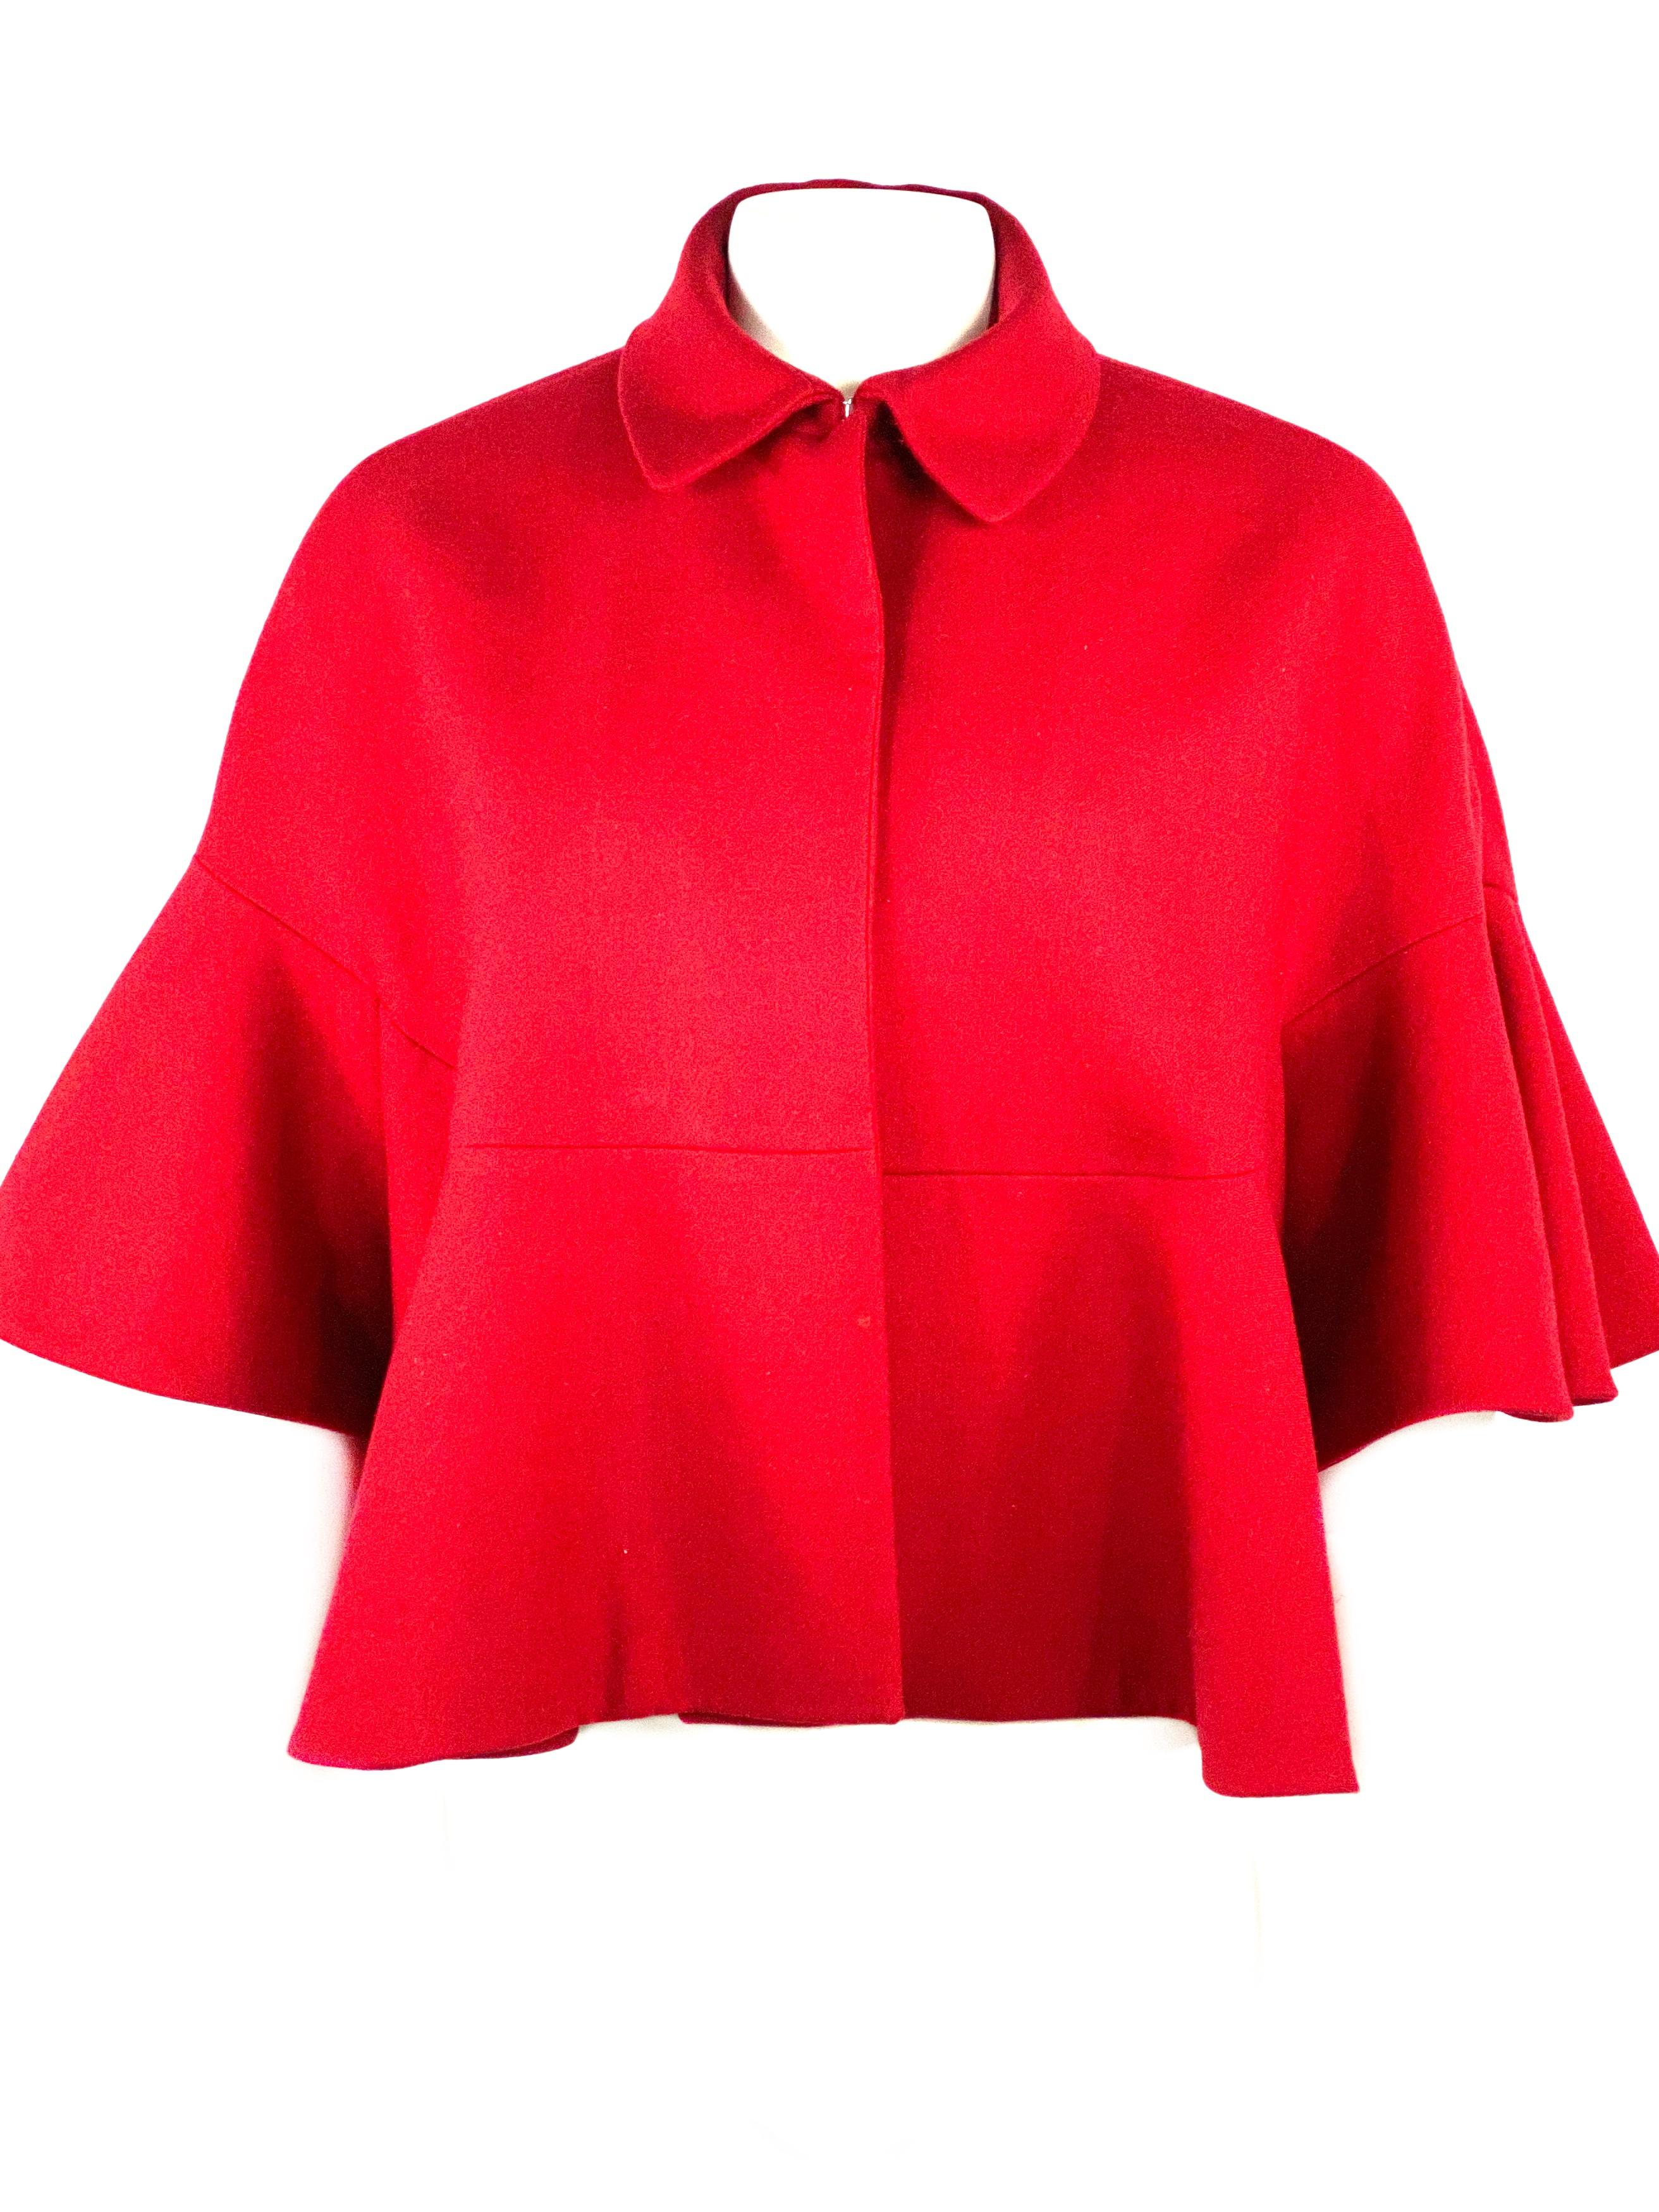 Vintage Christian Dior Red Wool Cape Poncho Size 8

Product detail:
Size US 8
100% Wool
Silver tone front hook closure
Featuring ½ length flare sleeves
Loose fit 
Made in France
